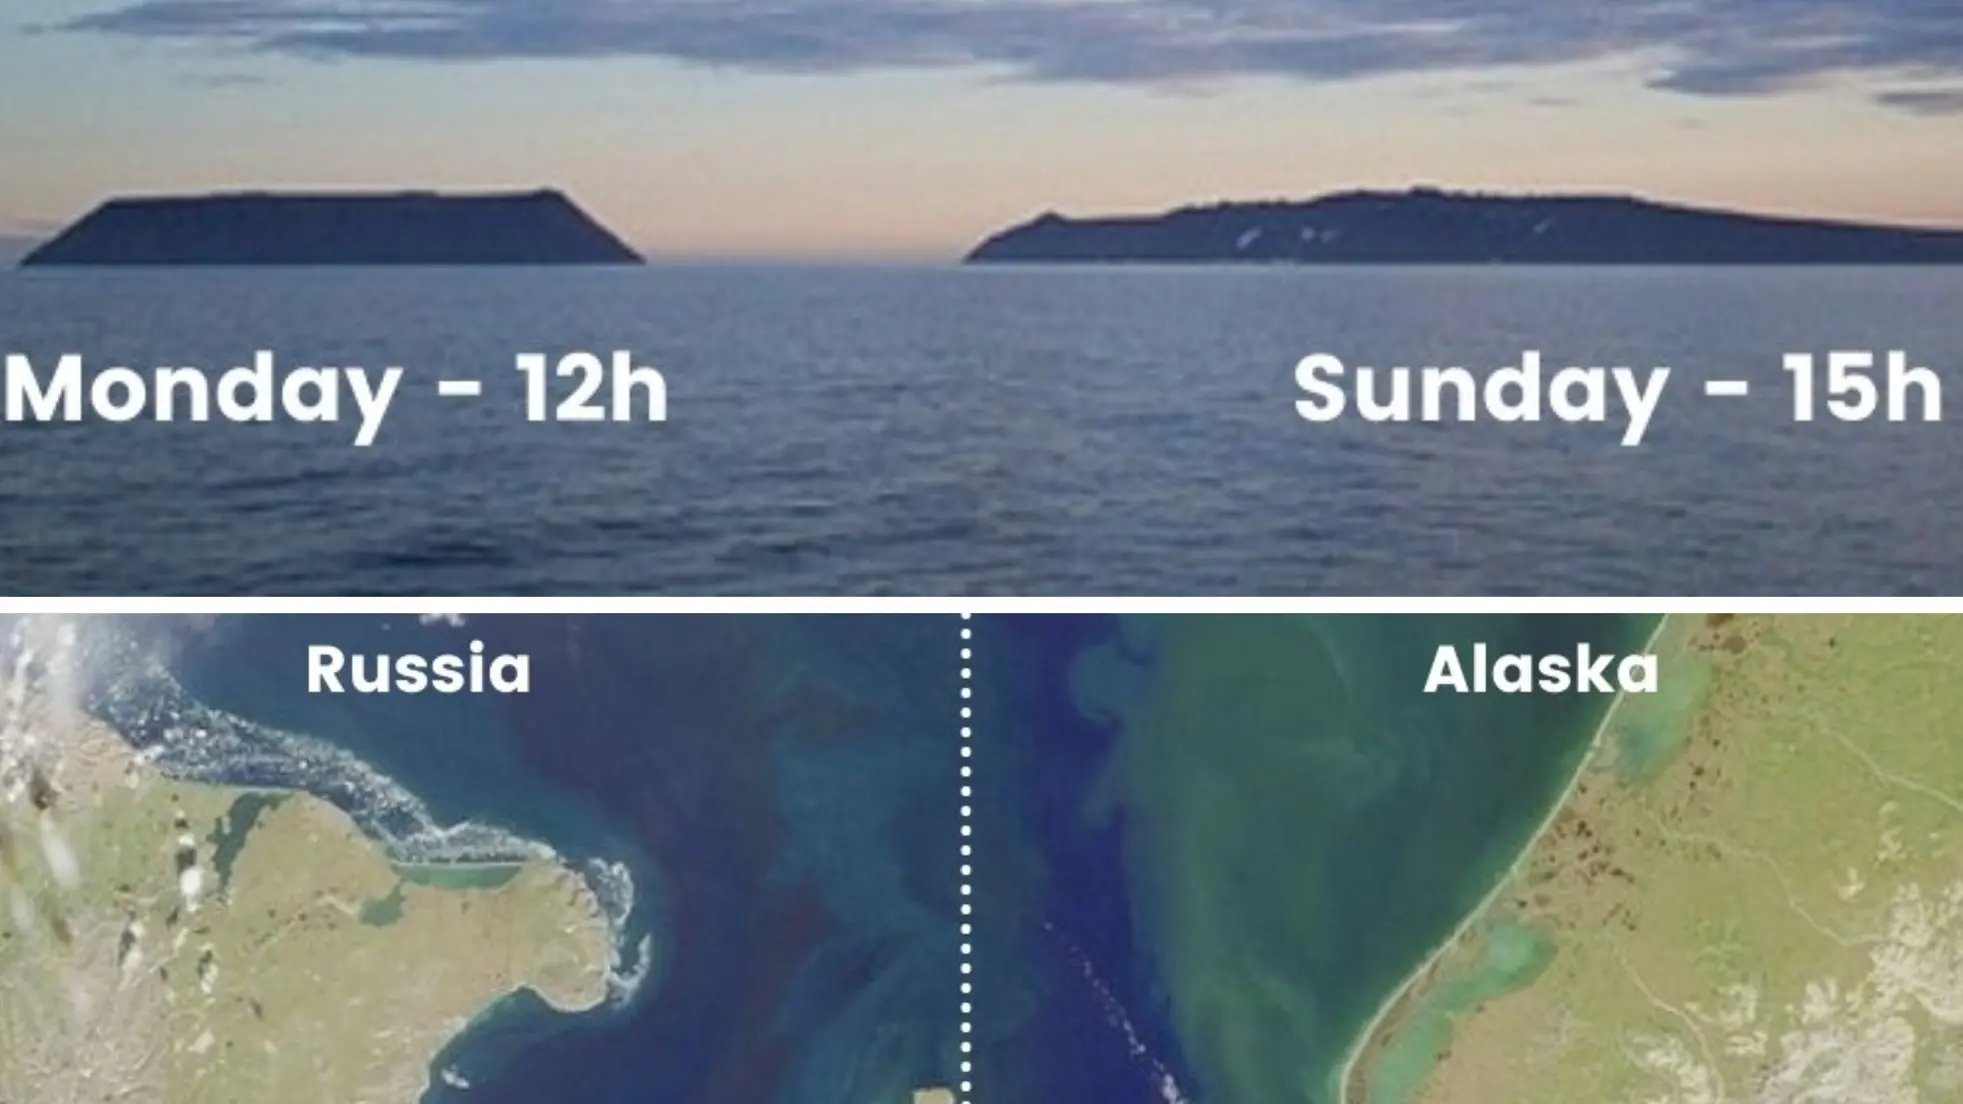 tomorrow and yesterday island time difference